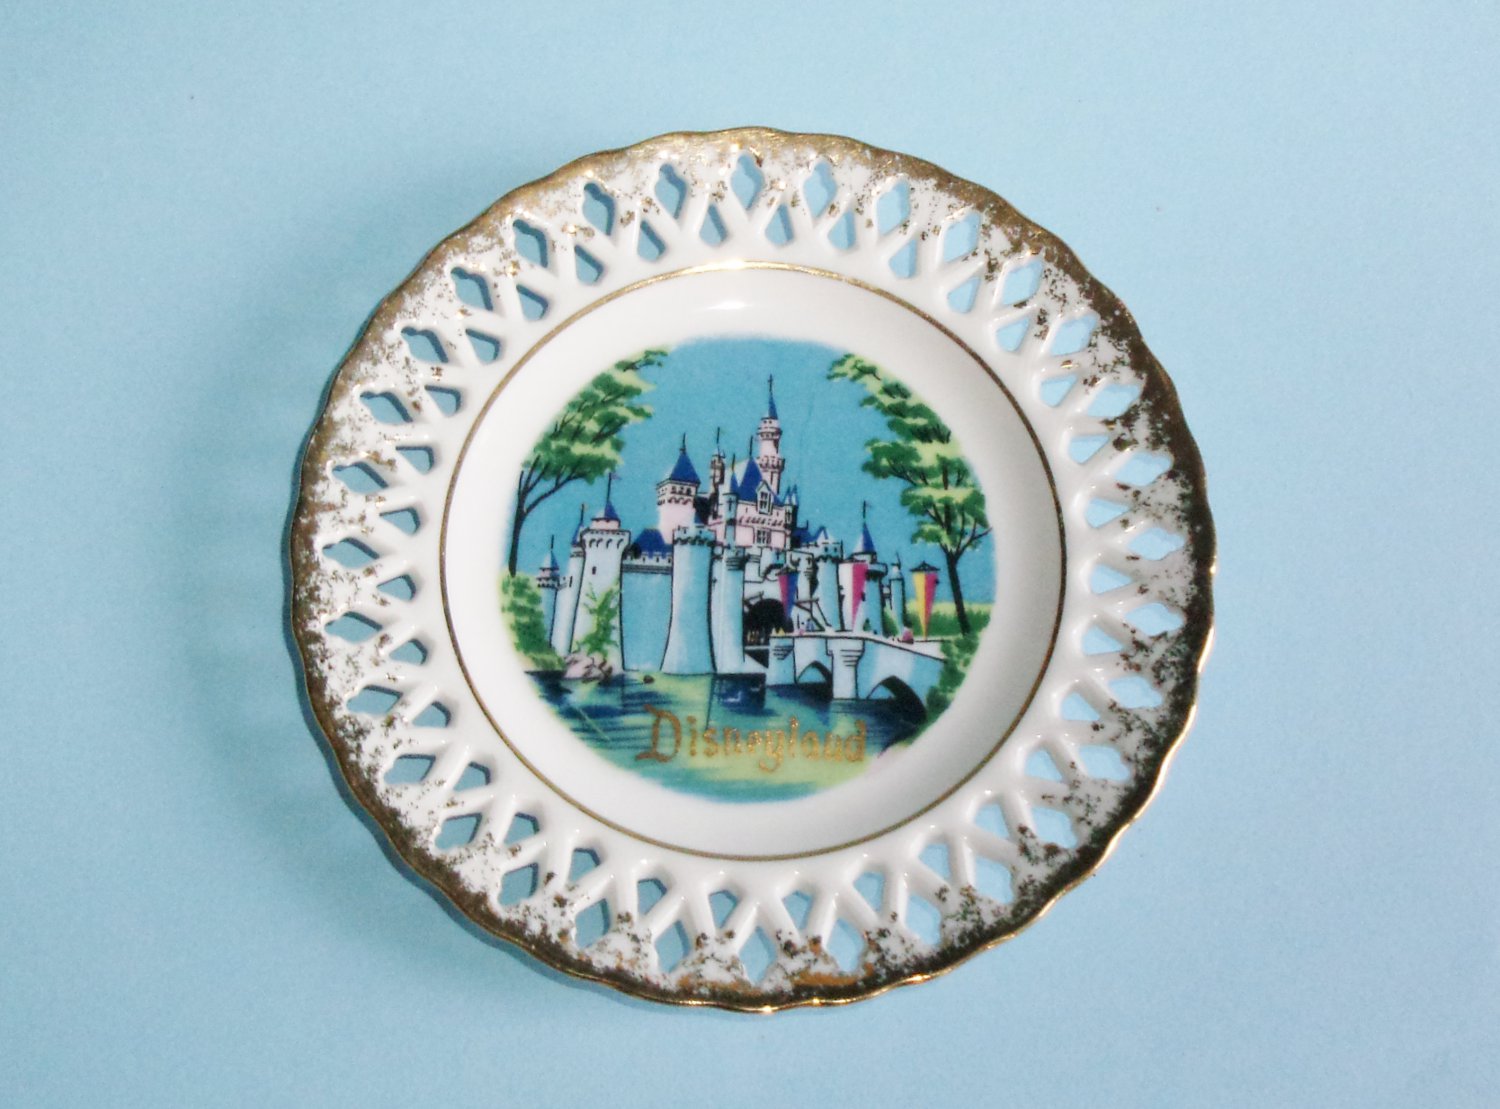 Vintage Disneyland Decorative Plate Reticulated 6.25 Inch Made in Japan